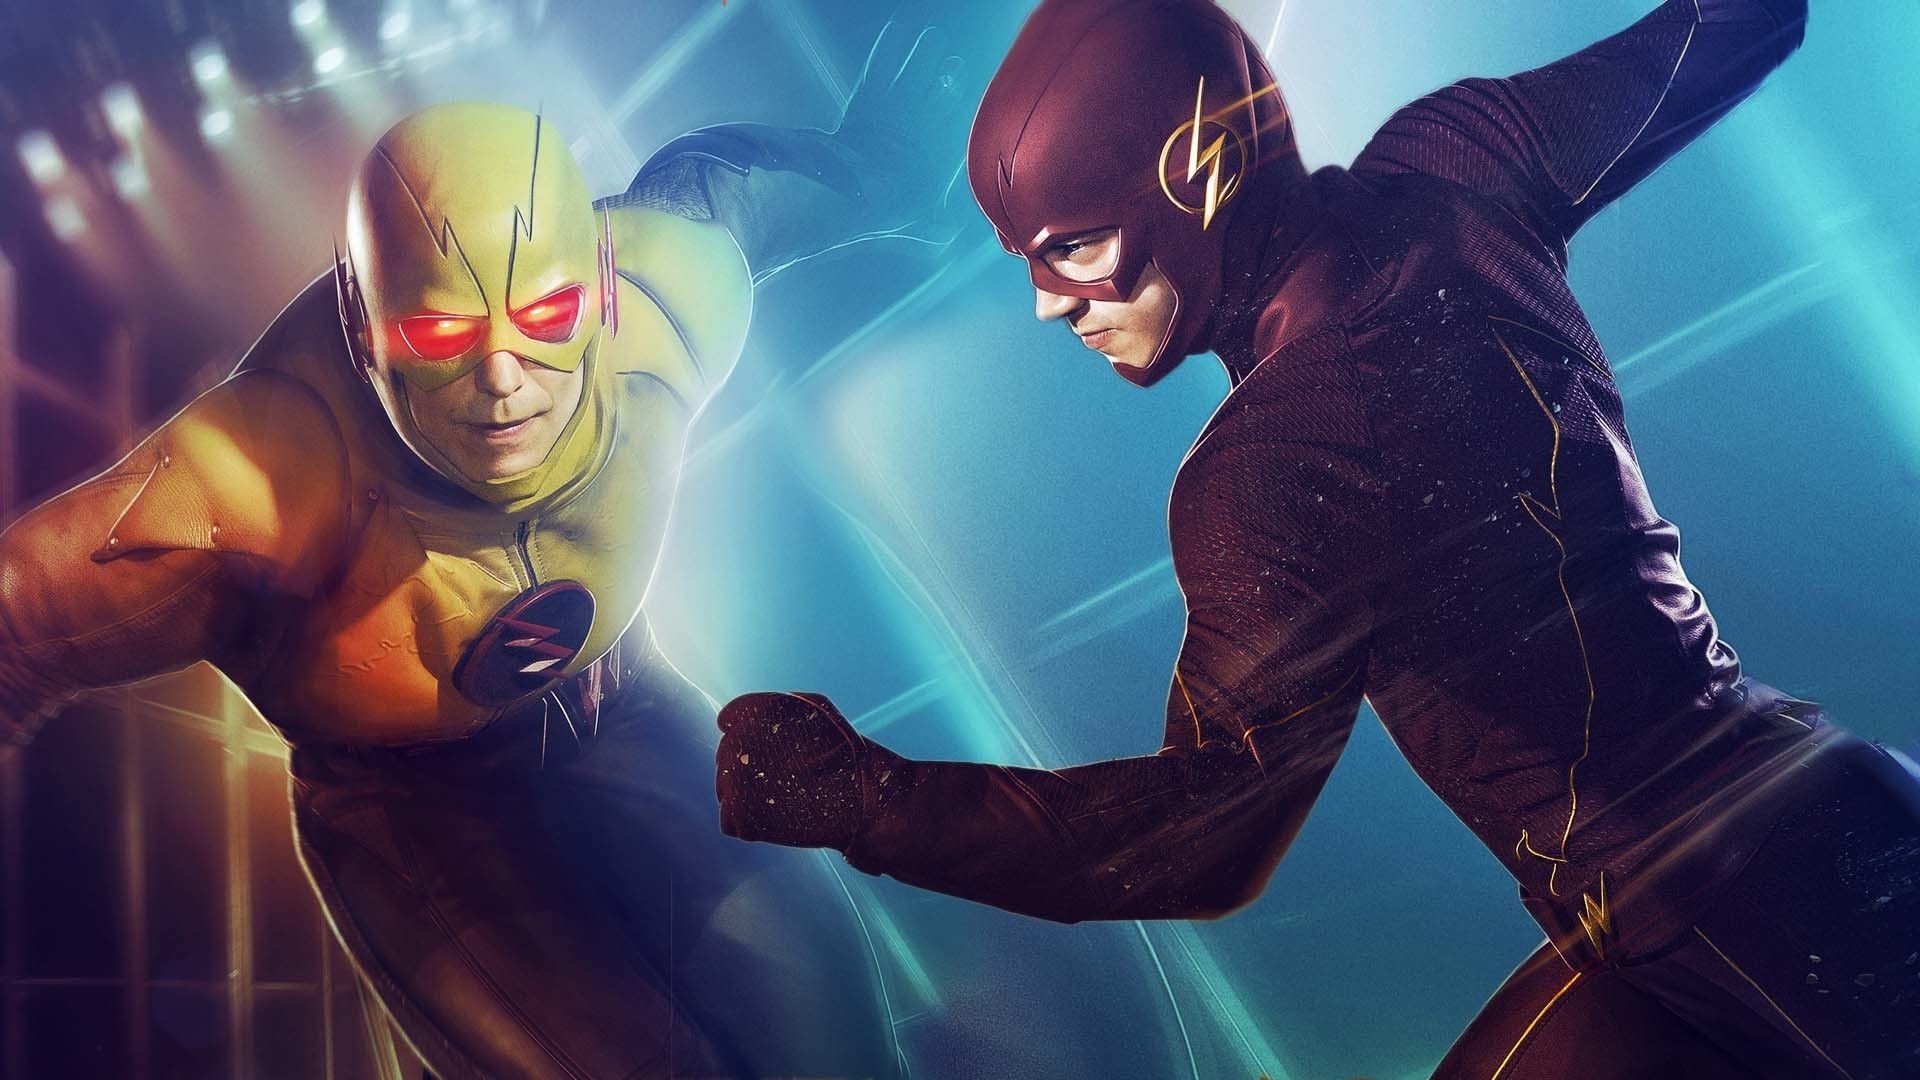 1920x1080 1920x1200 The Flash Wallpapers | HD Wallpapers | ID #14533">